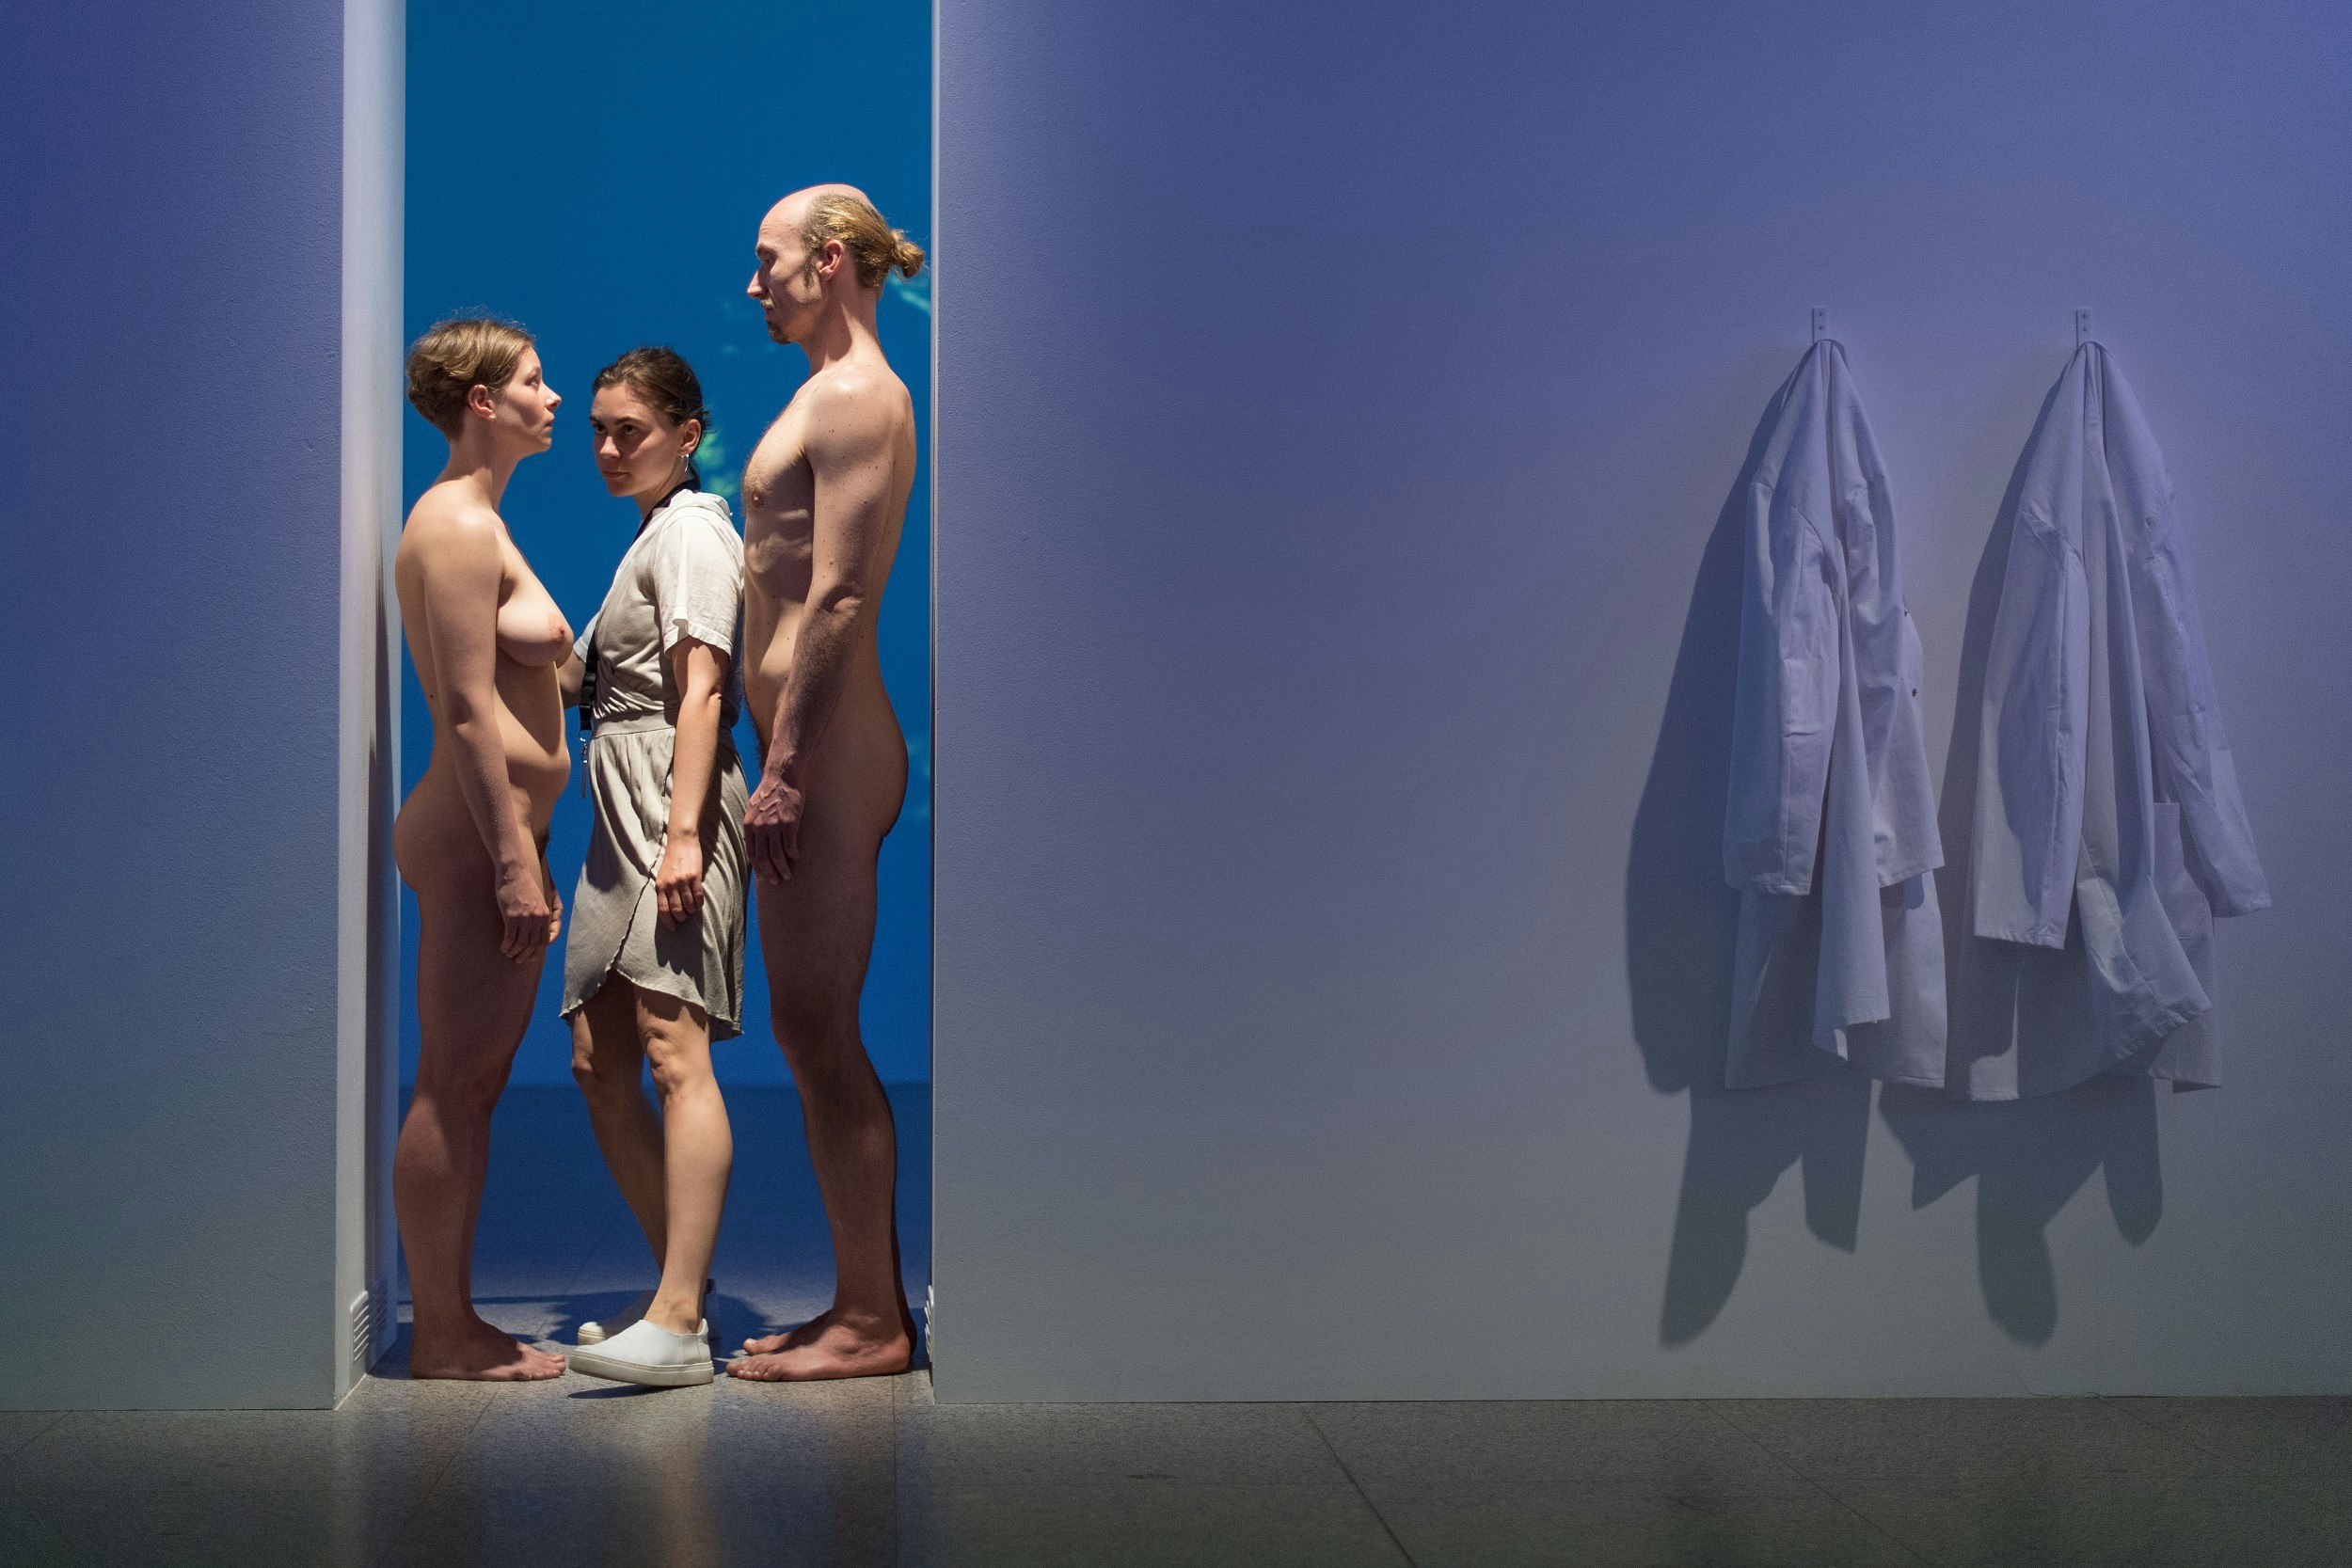 An image of the art installation 'Imponderabilia'. A naked man and woman are standing facing each other in a narrow doorway; a visitor is passing sideways between them.